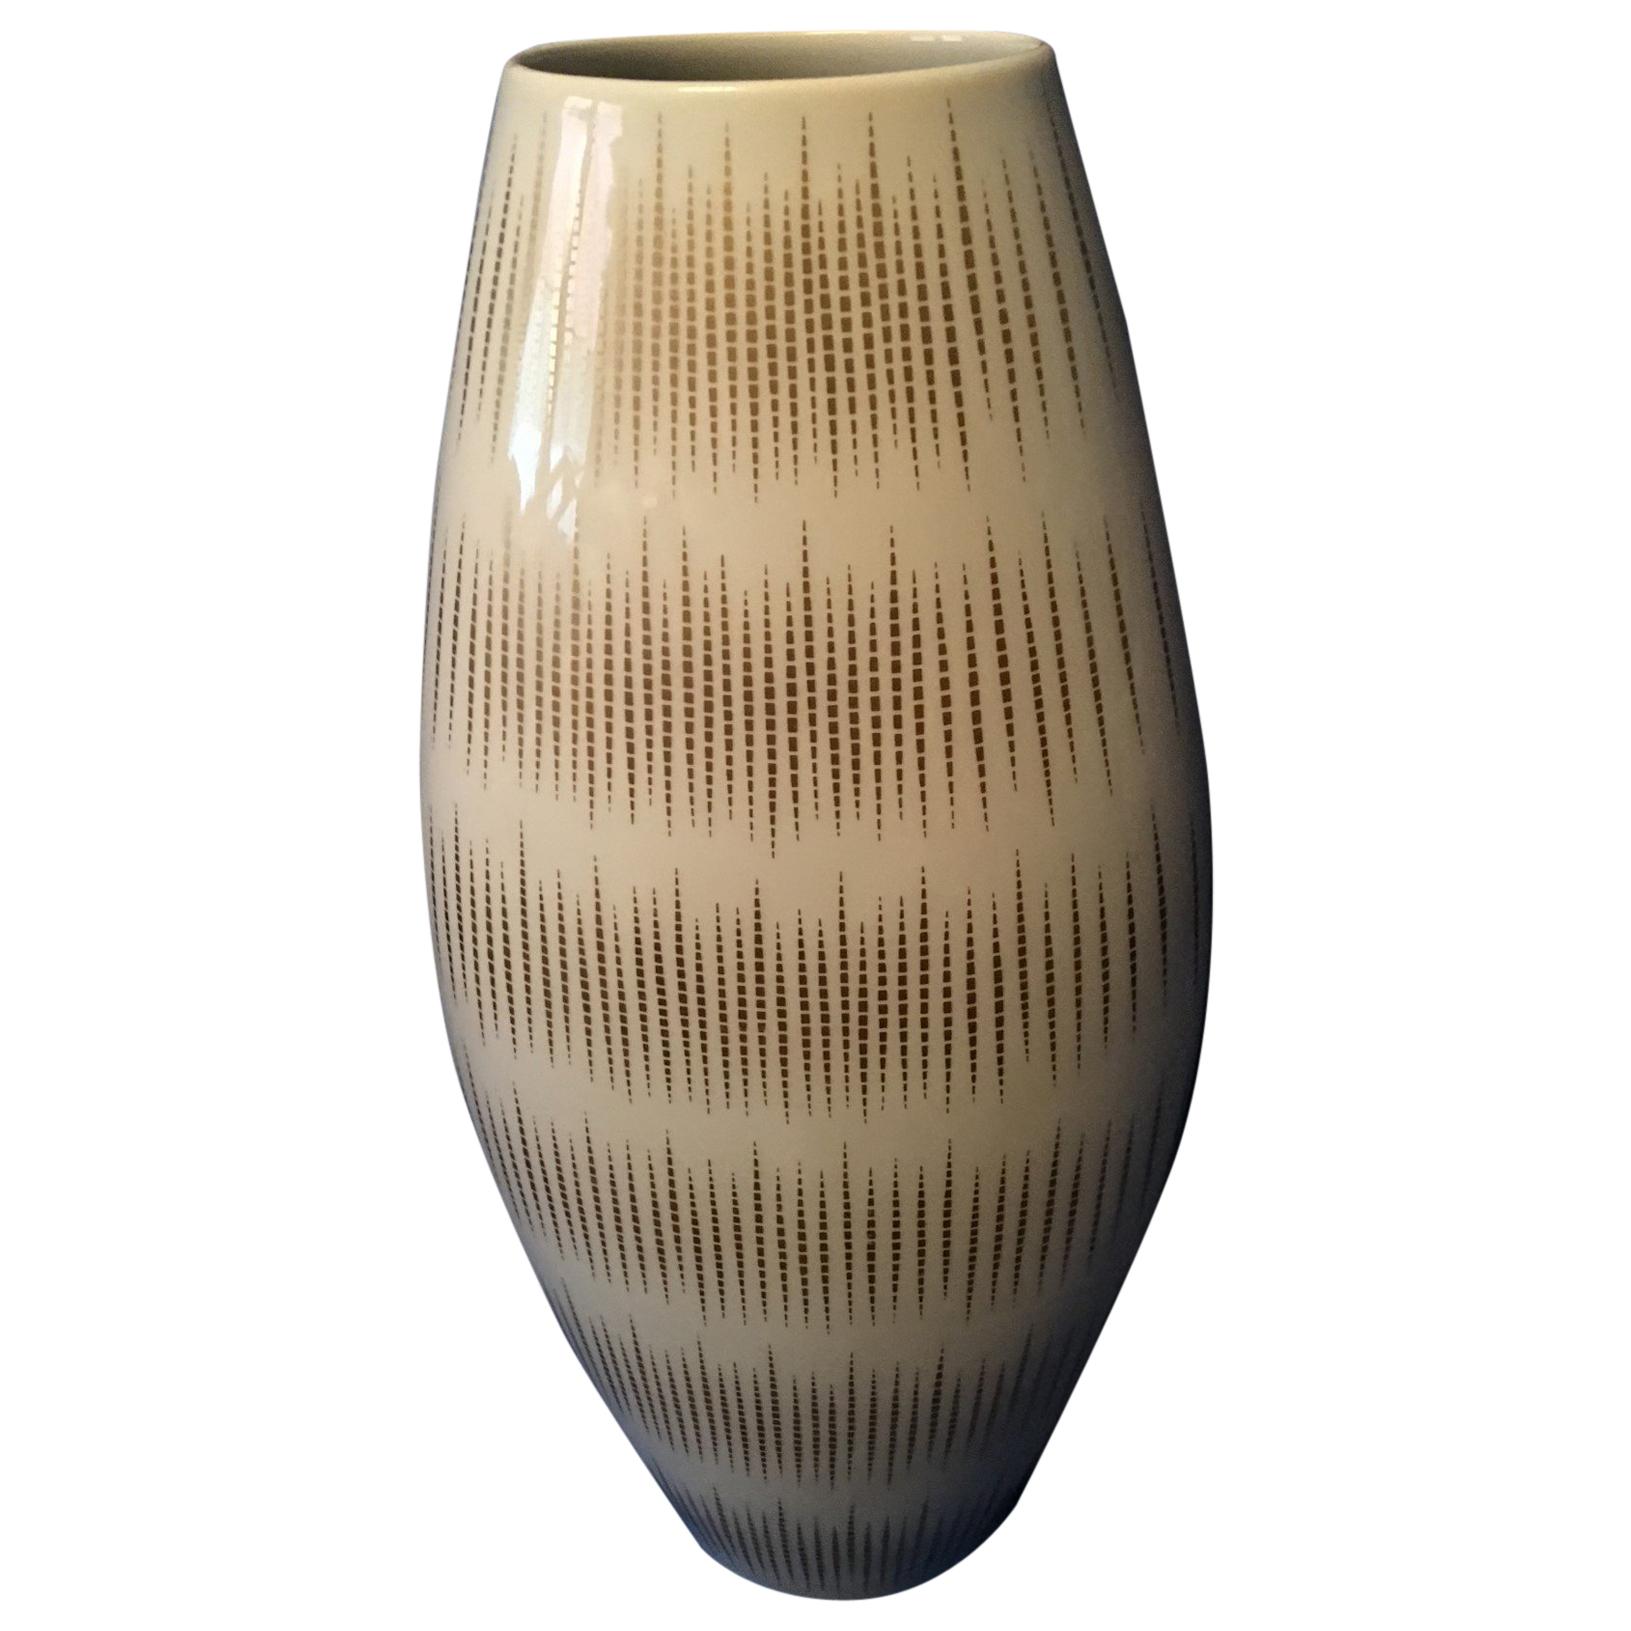 show original title choice & Original Packaging ** Details about   Rosenthal Studio-Line Collana White-Gold Vase 13 cm *** NEW 1 